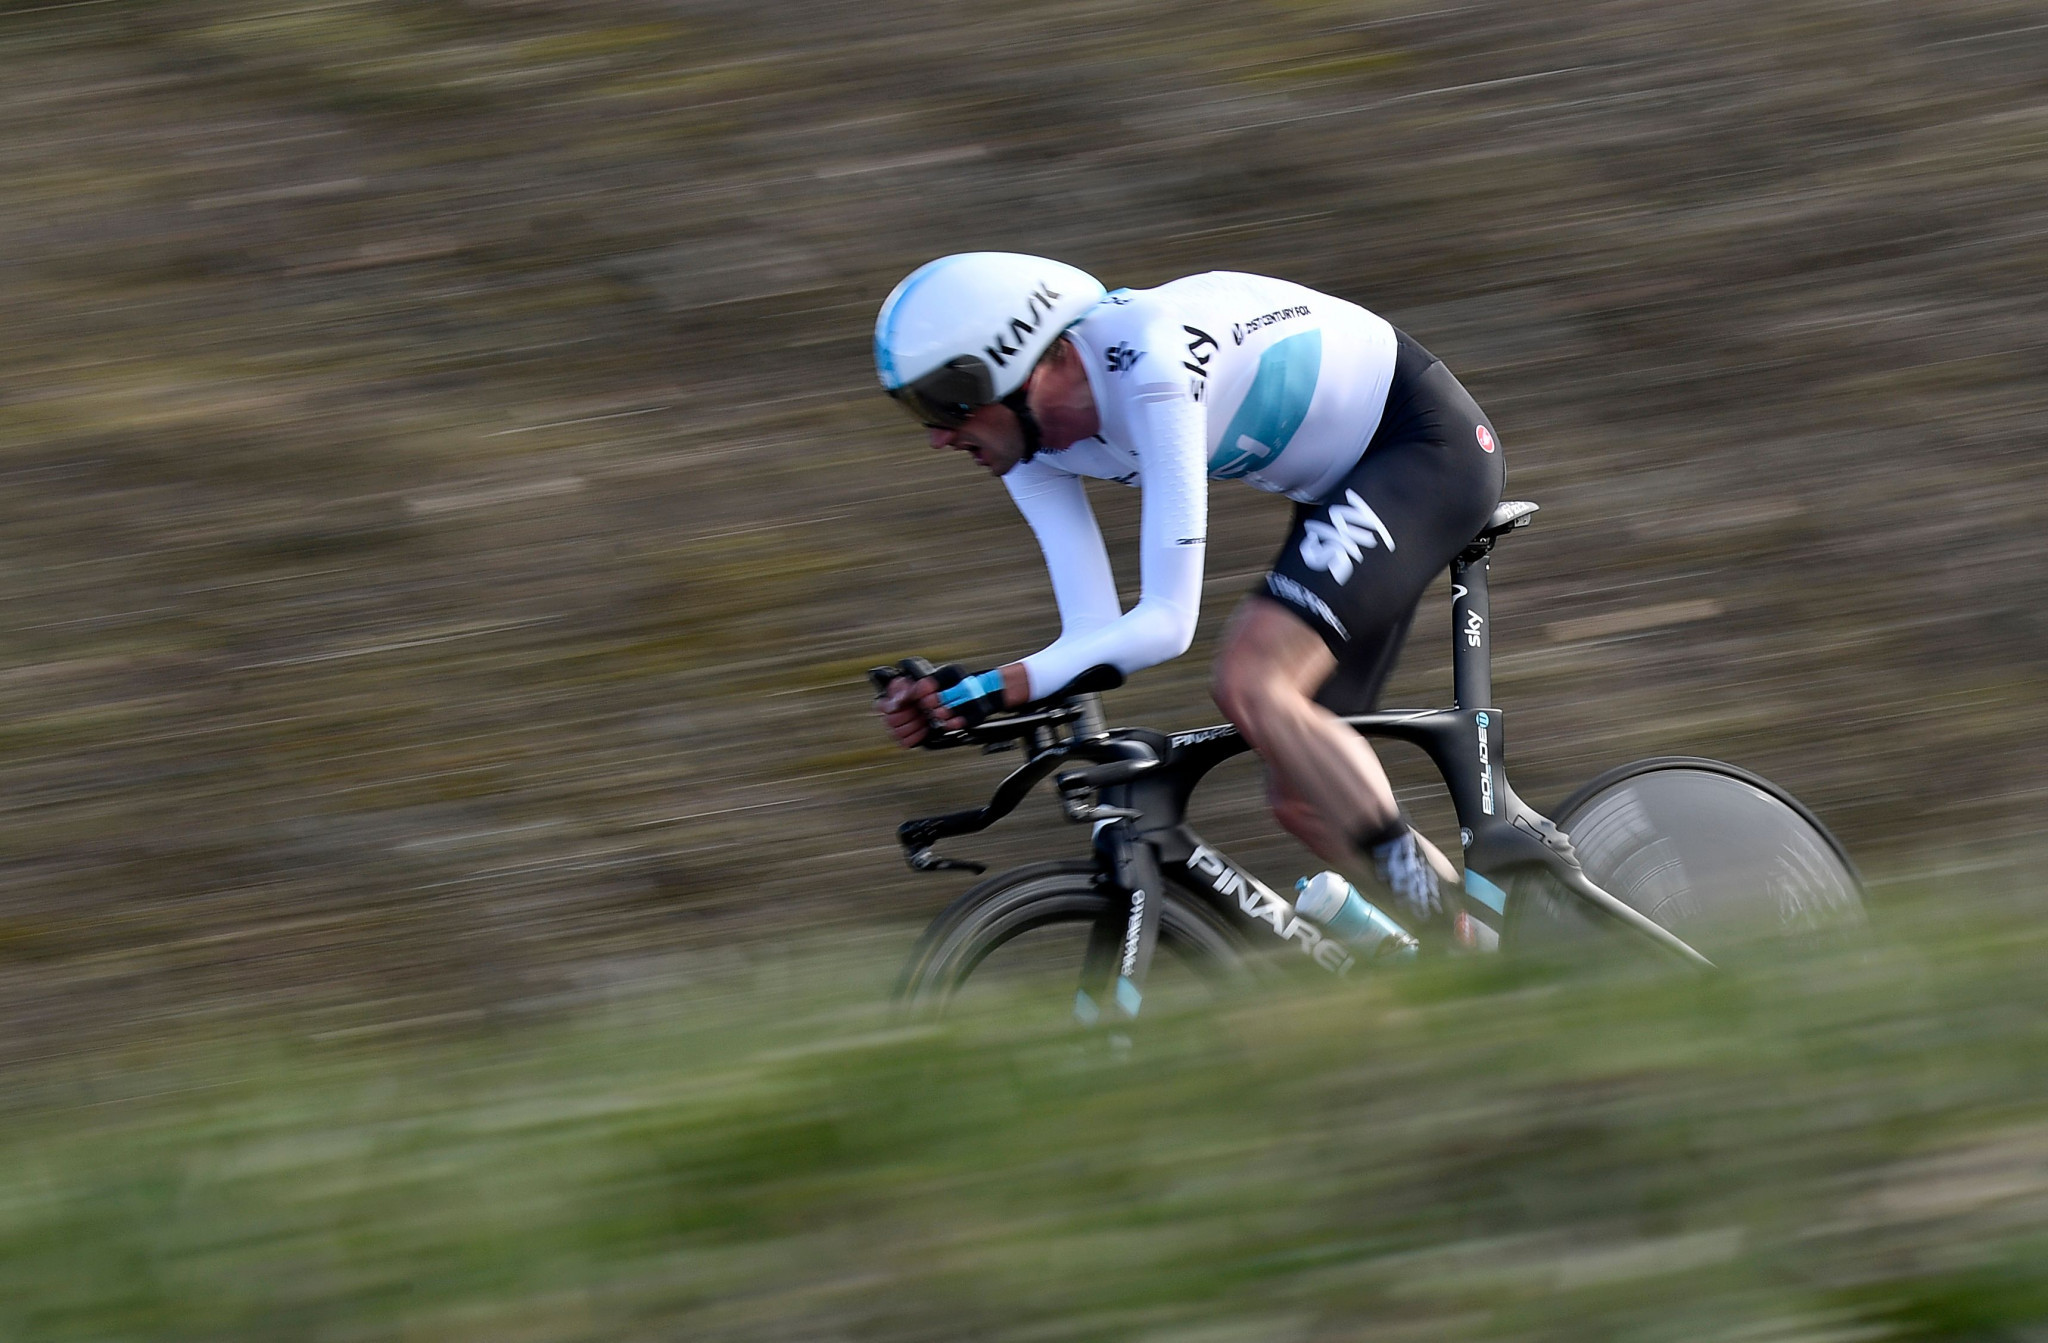 Poels clinches time trial victory at Paris-Nice to boost general classification hopes